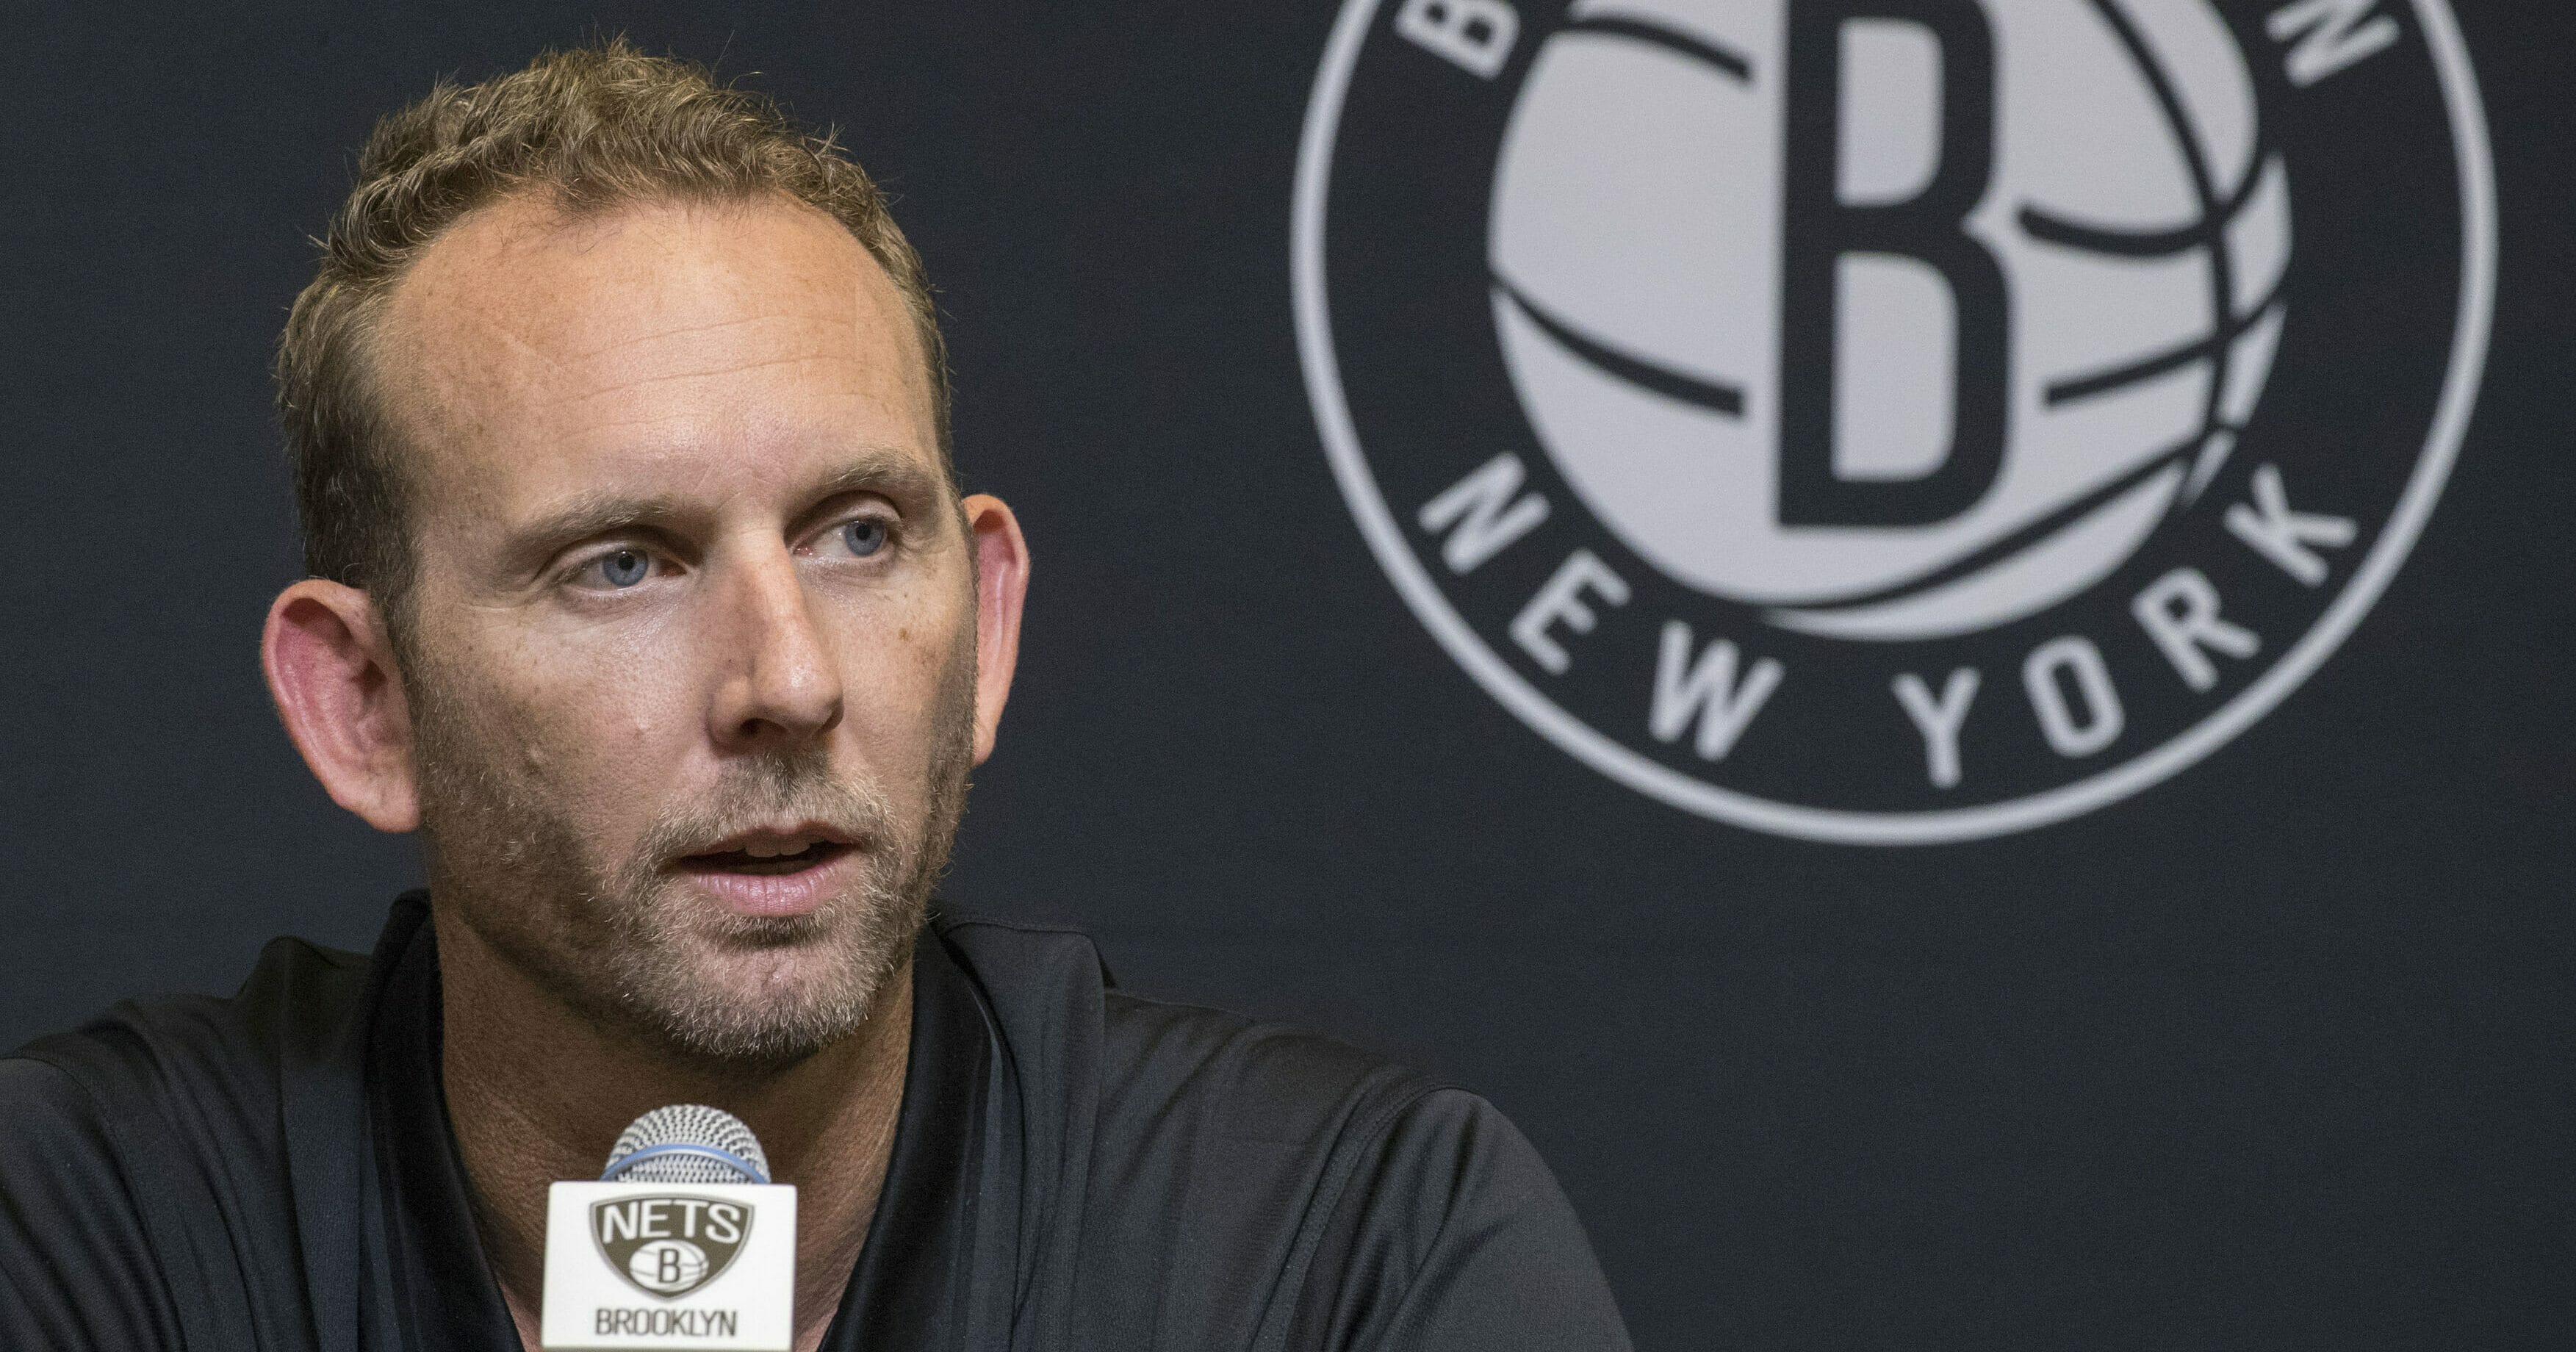 This June 18, 2018, file photo shows Brooklyn Nets General Manager Sean Marks during a news conference introducing the team's draft picks in New York.